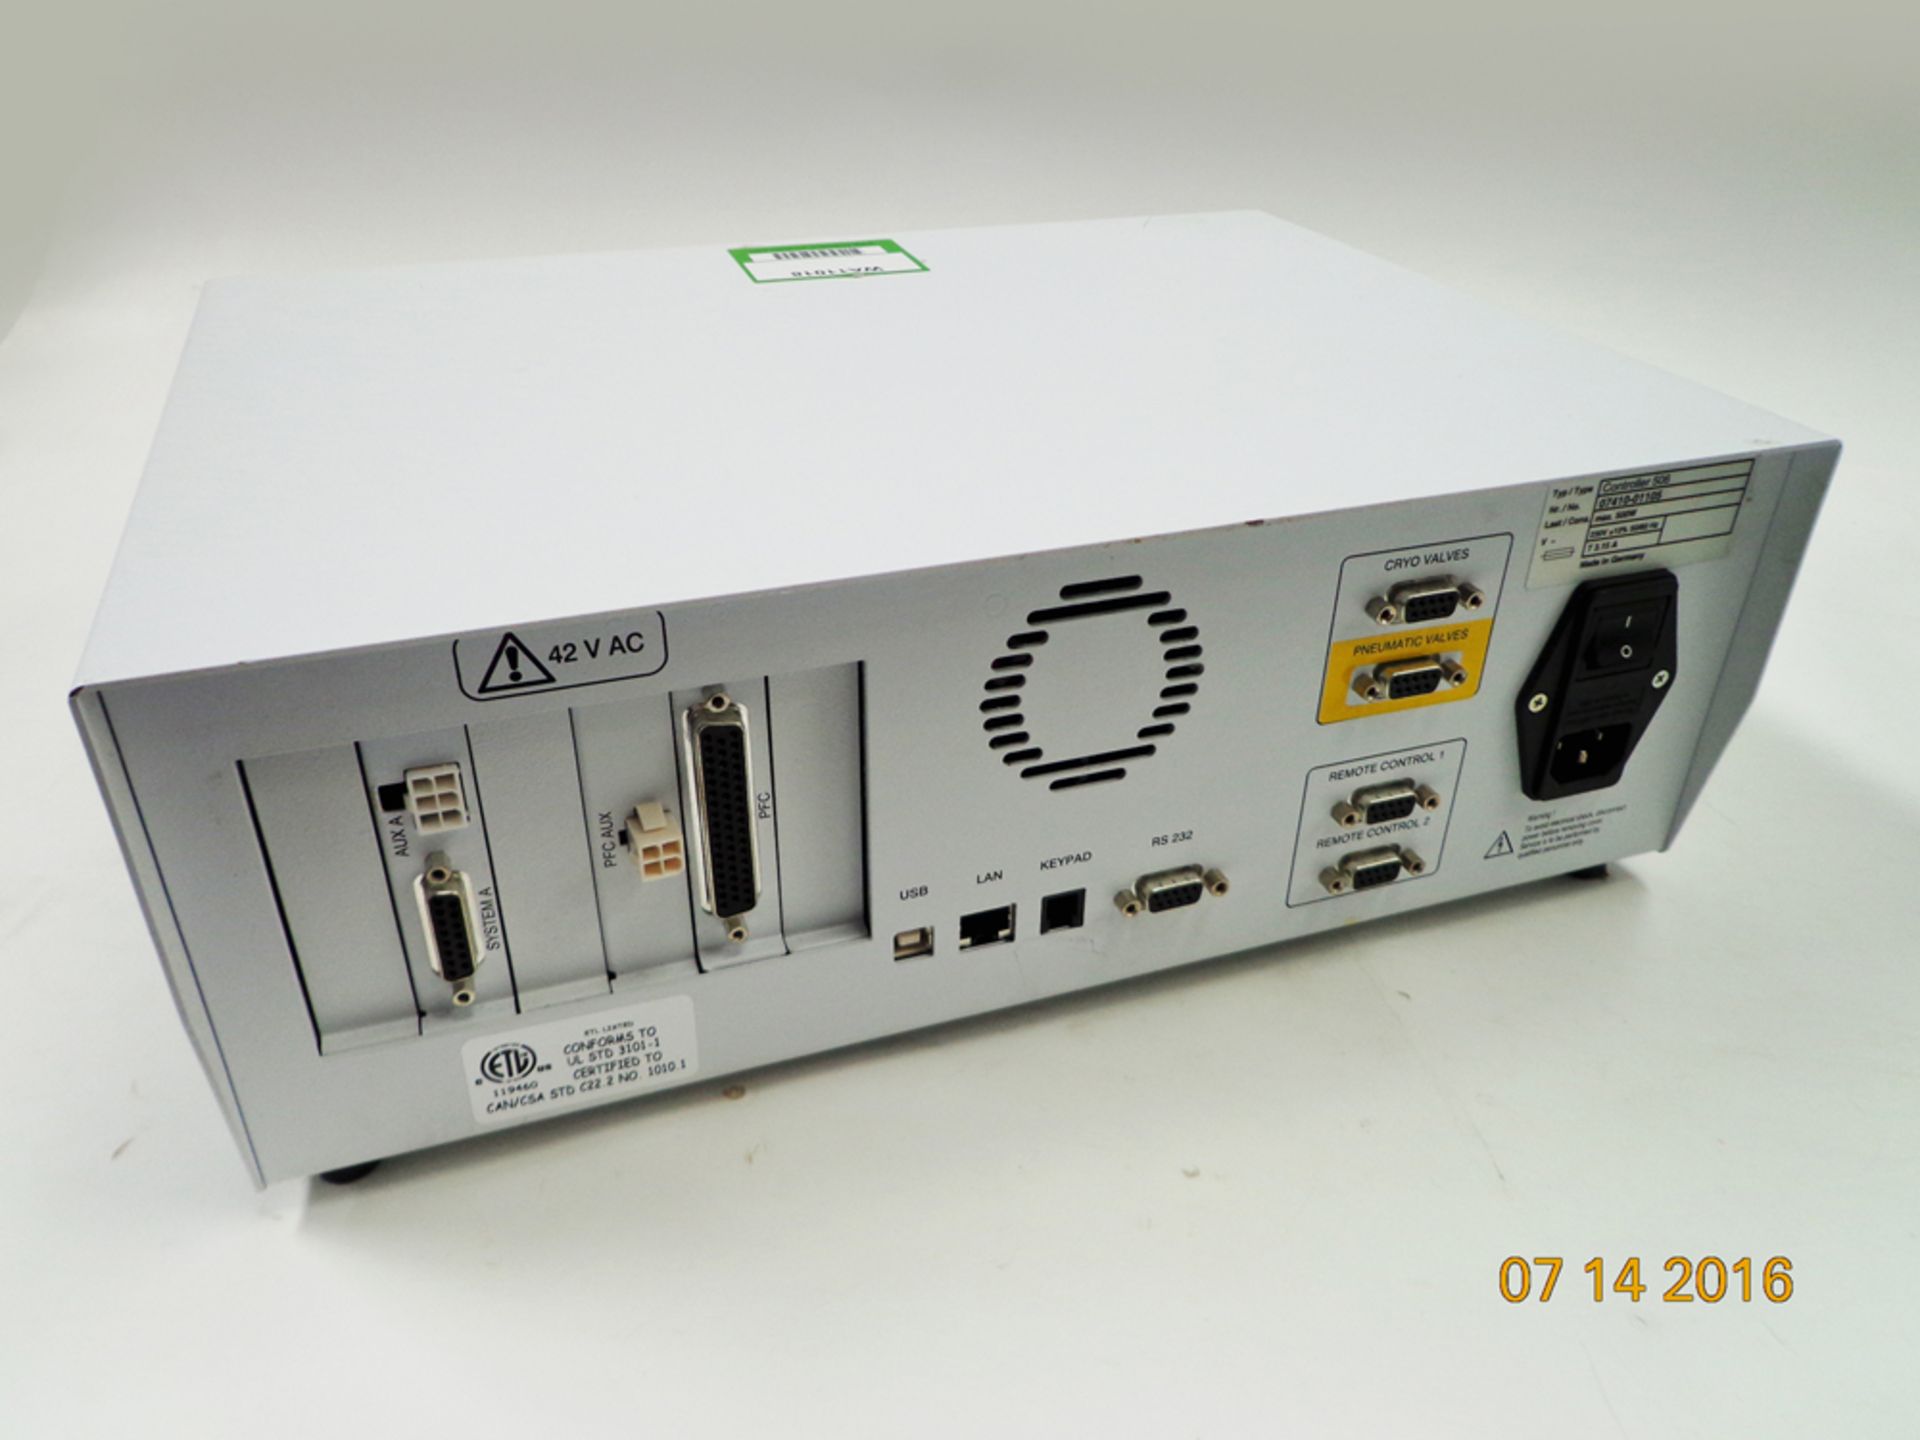 Gerstel MAS C506 Modular Analytical Systems Controller, serial number 07410-01105 (Ref: WA11018) - Image 3 of 3